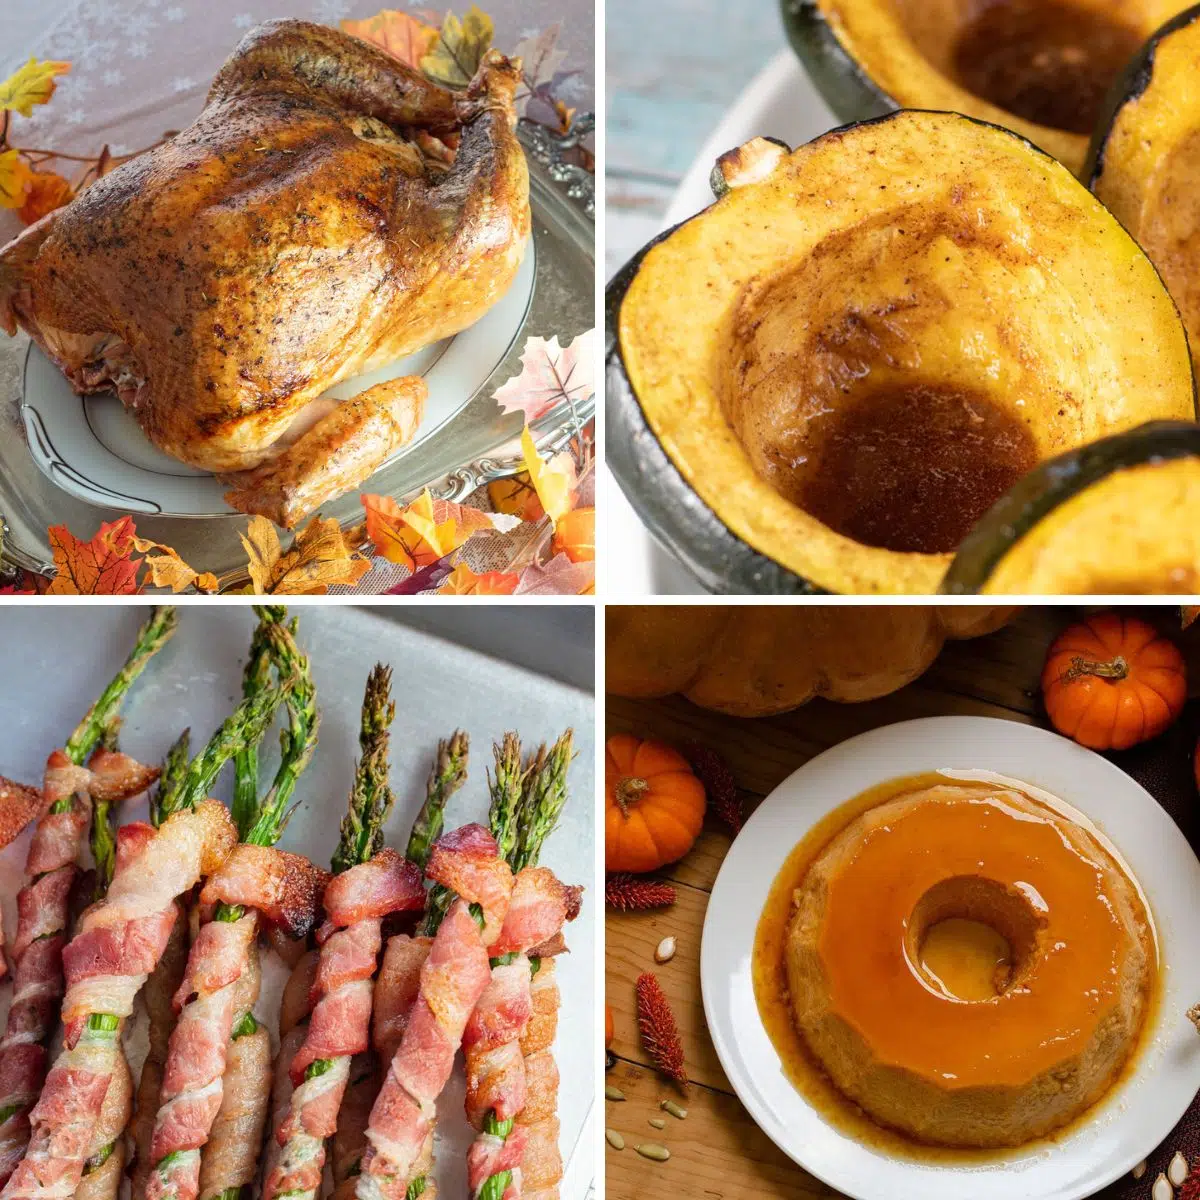 Best elegant Thanksgiving dinner menu ideas for an amazing meal this holiday season.